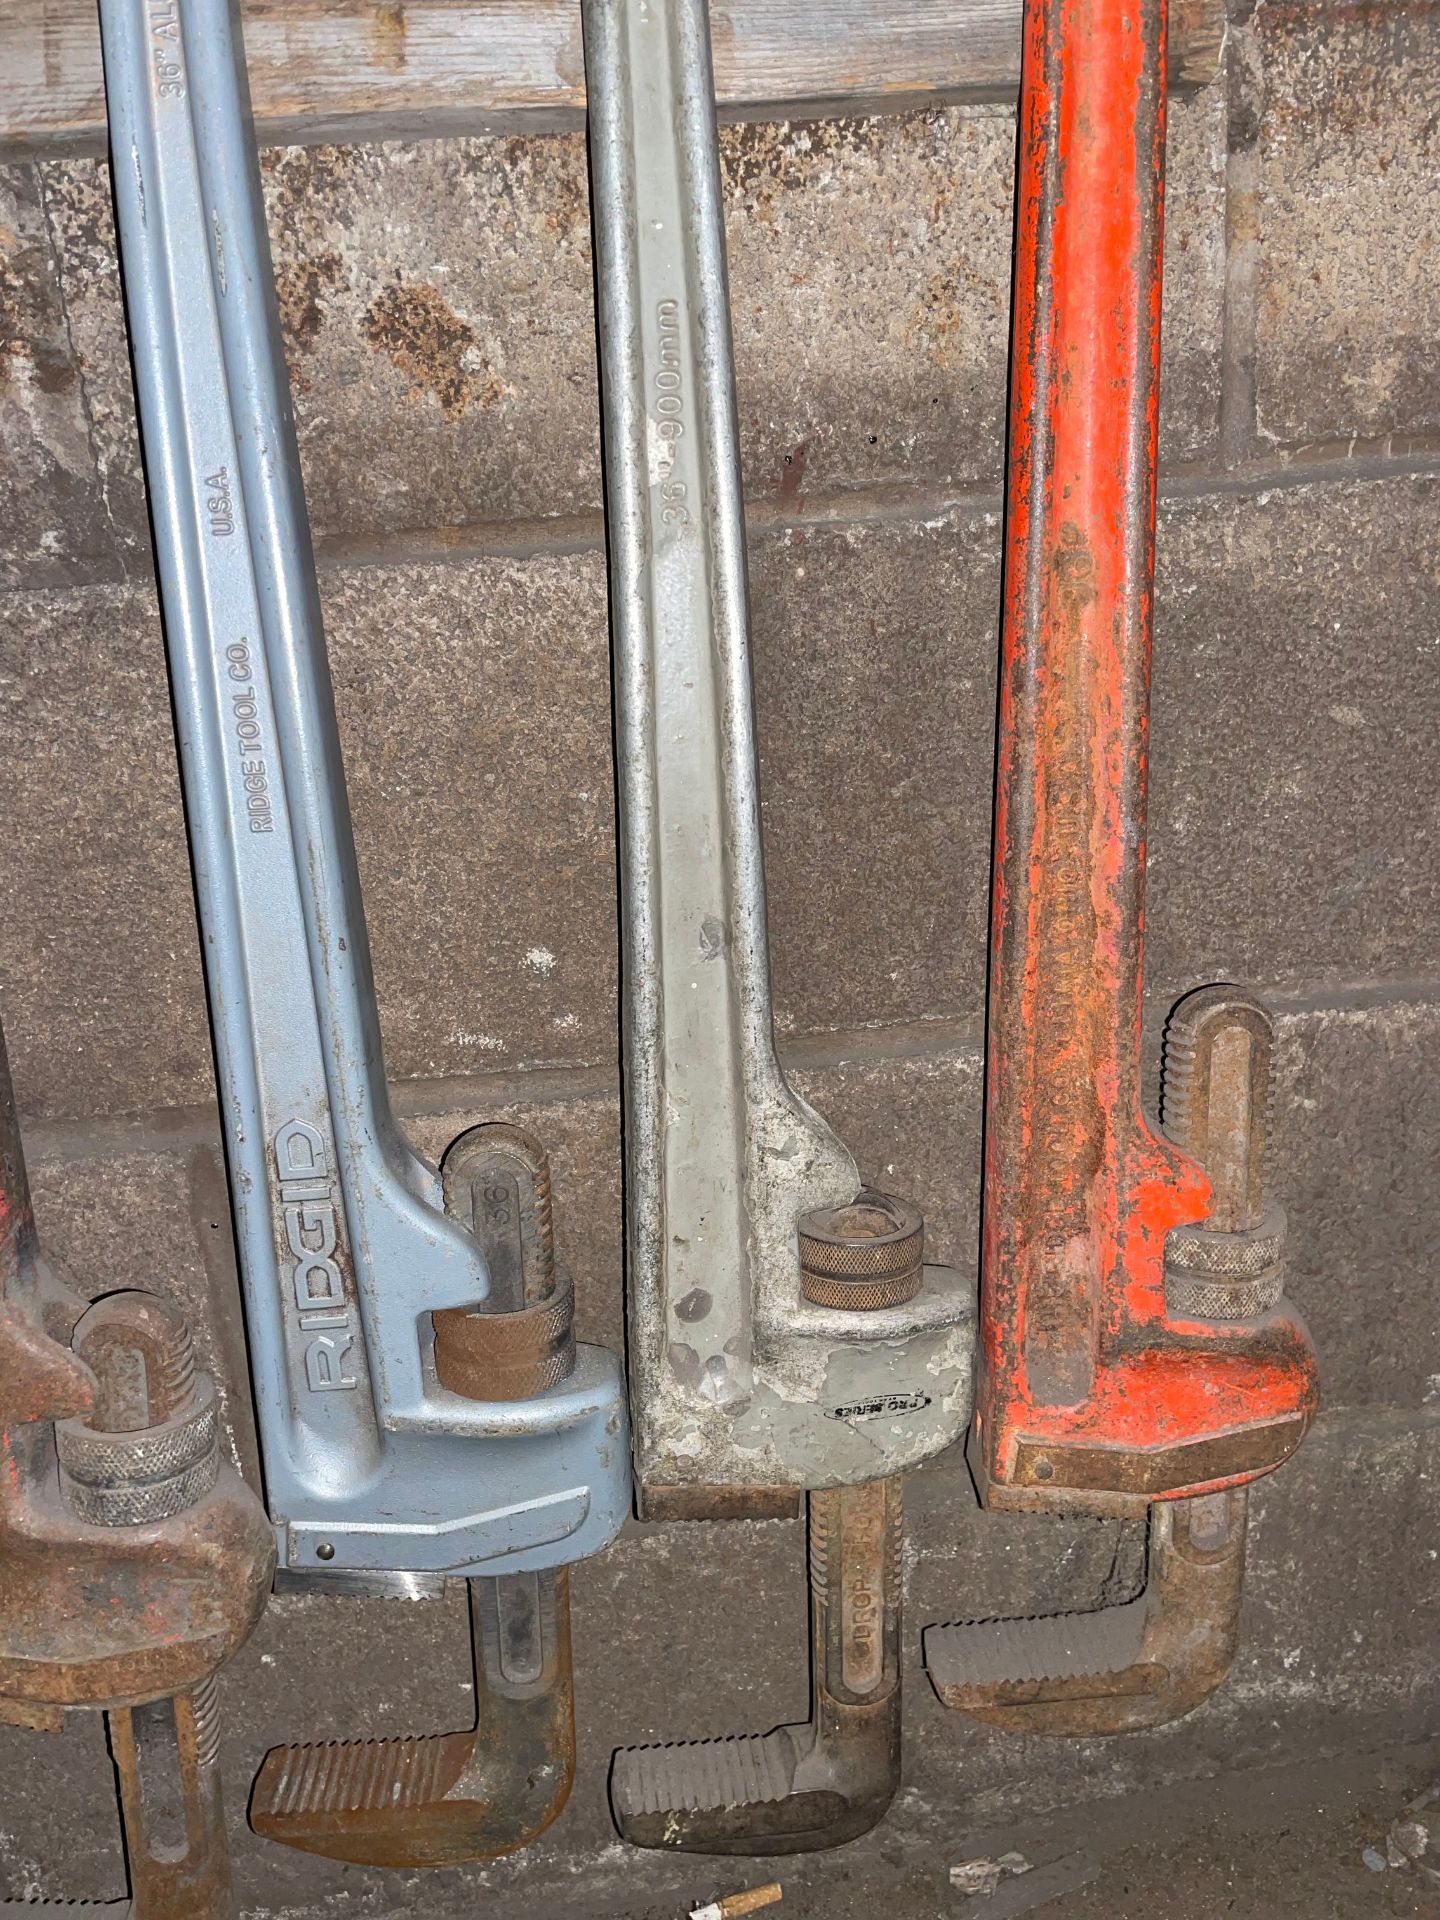 Heavy Duty 36" Aluminum Pipe Wrench - Image 3 of 3